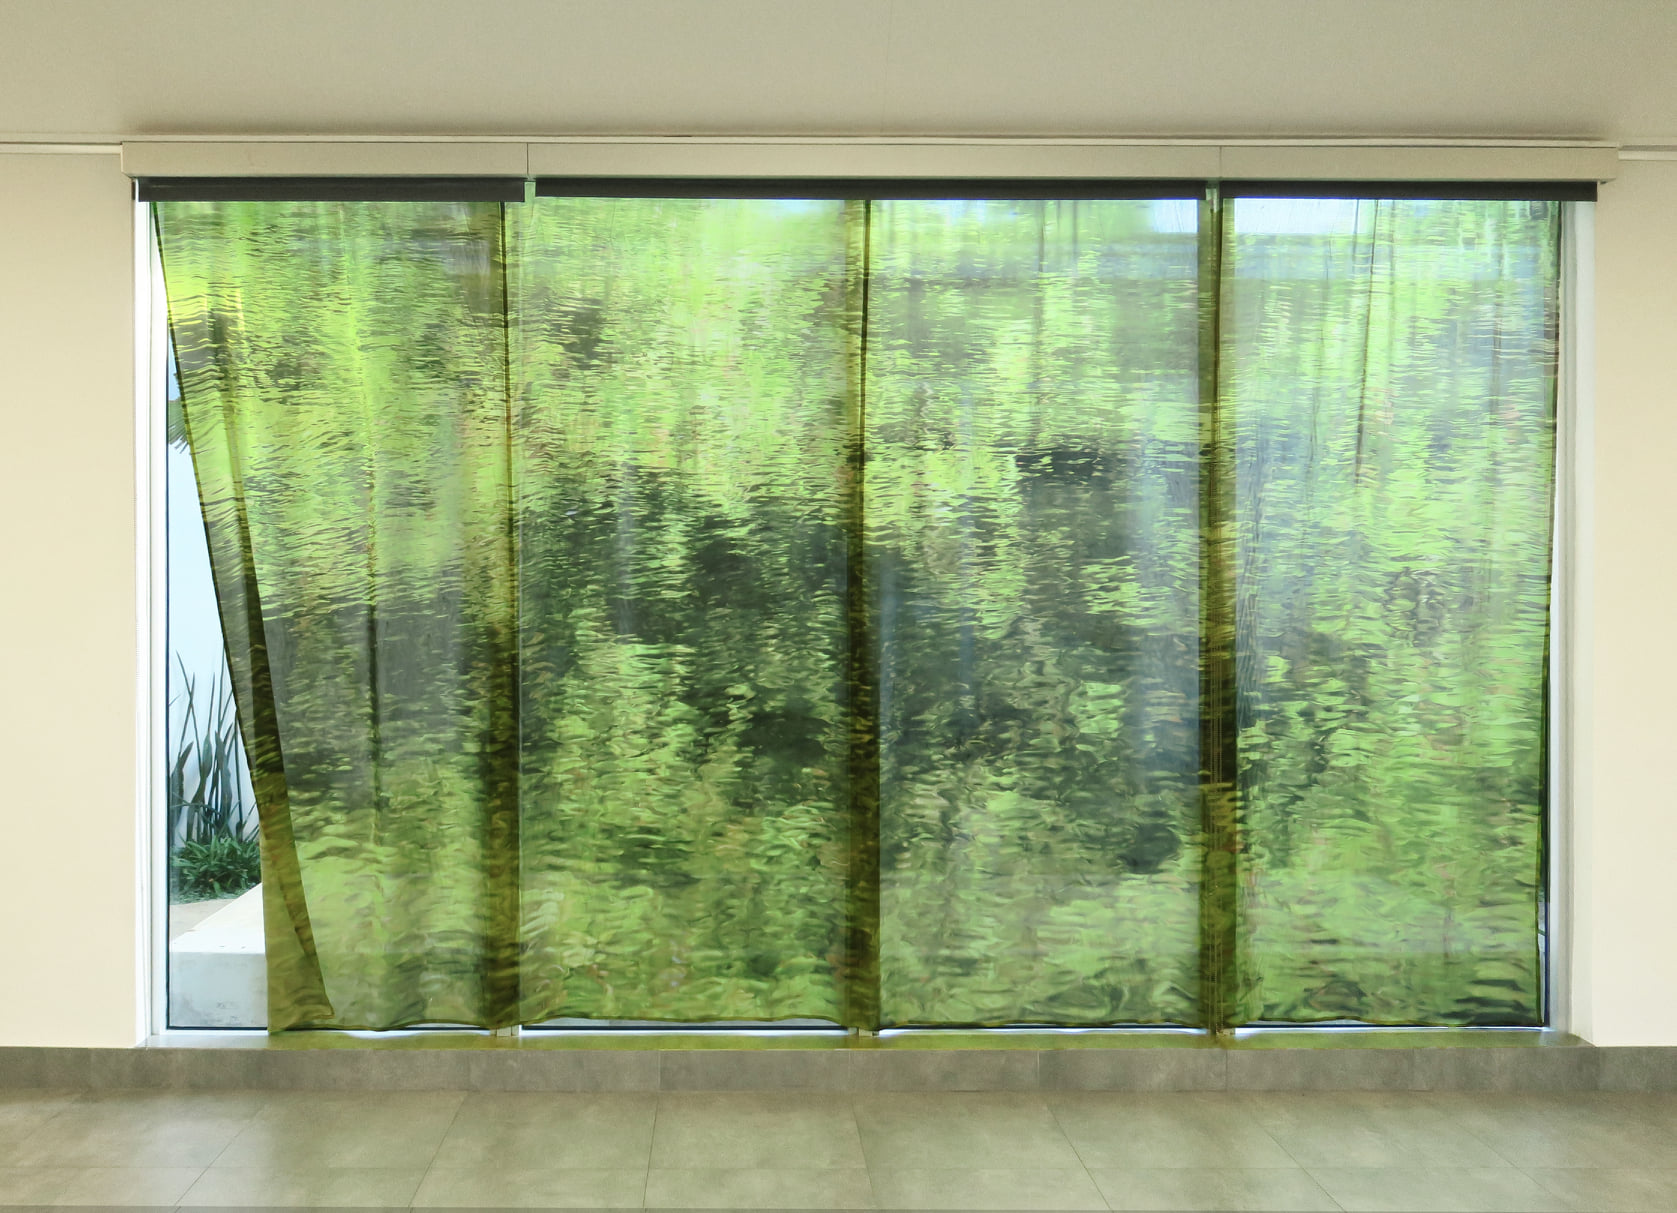 1_3-Liquid-Landscape-textile-installation-by-artist-Paul-Clemence-from-a-photo-taken-at-Beyeler-Foundation-in-Basel-Switzerland-photo-courtesy-of-the-artist